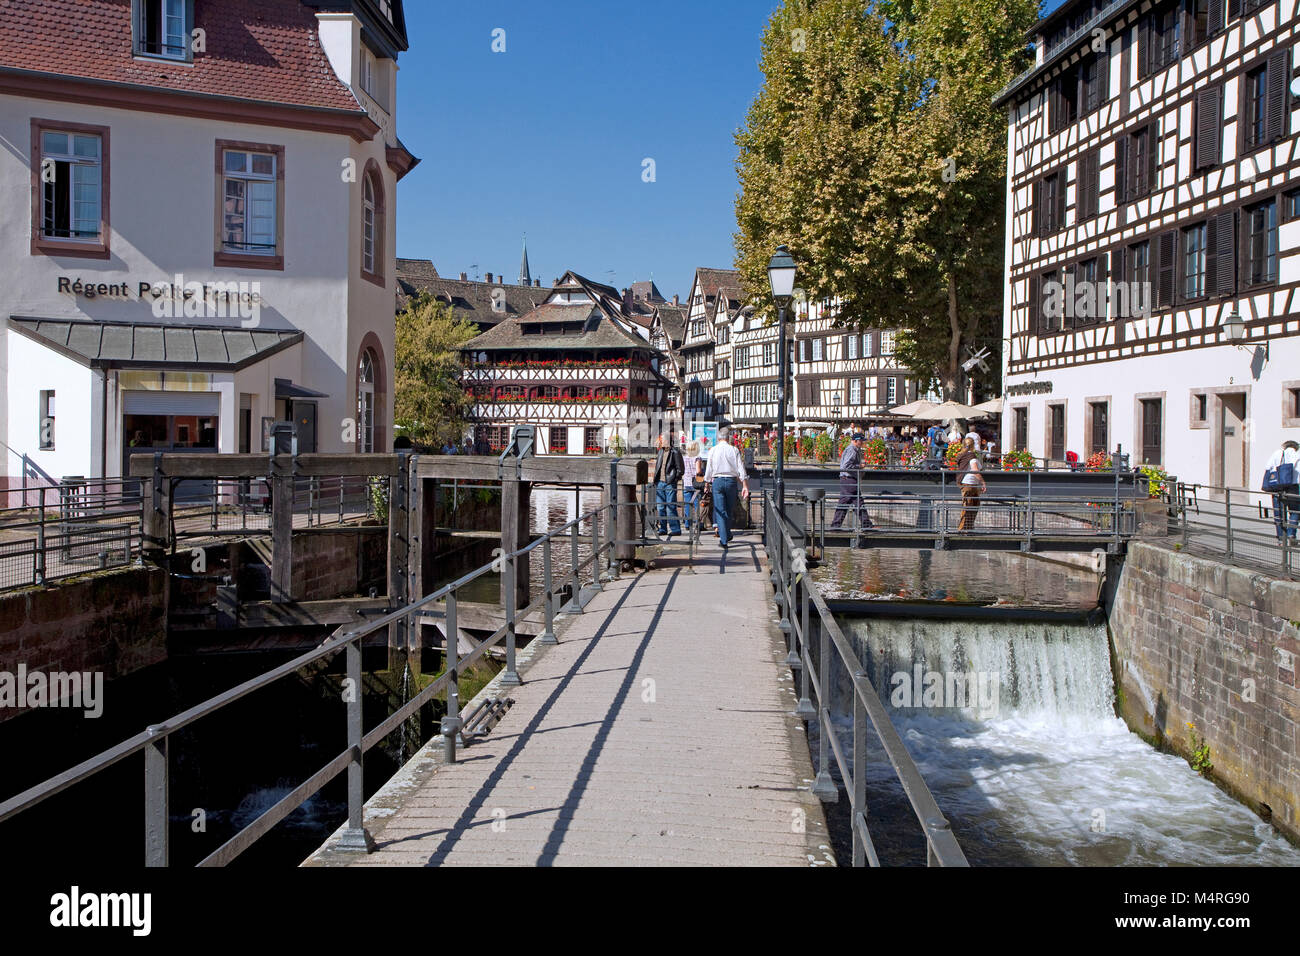 Floodgate at lll river, half-timbered houses, La Petite France (Little France), Strasbourg, Alsace, Bas-Rhin, France, Europe Stock Photo